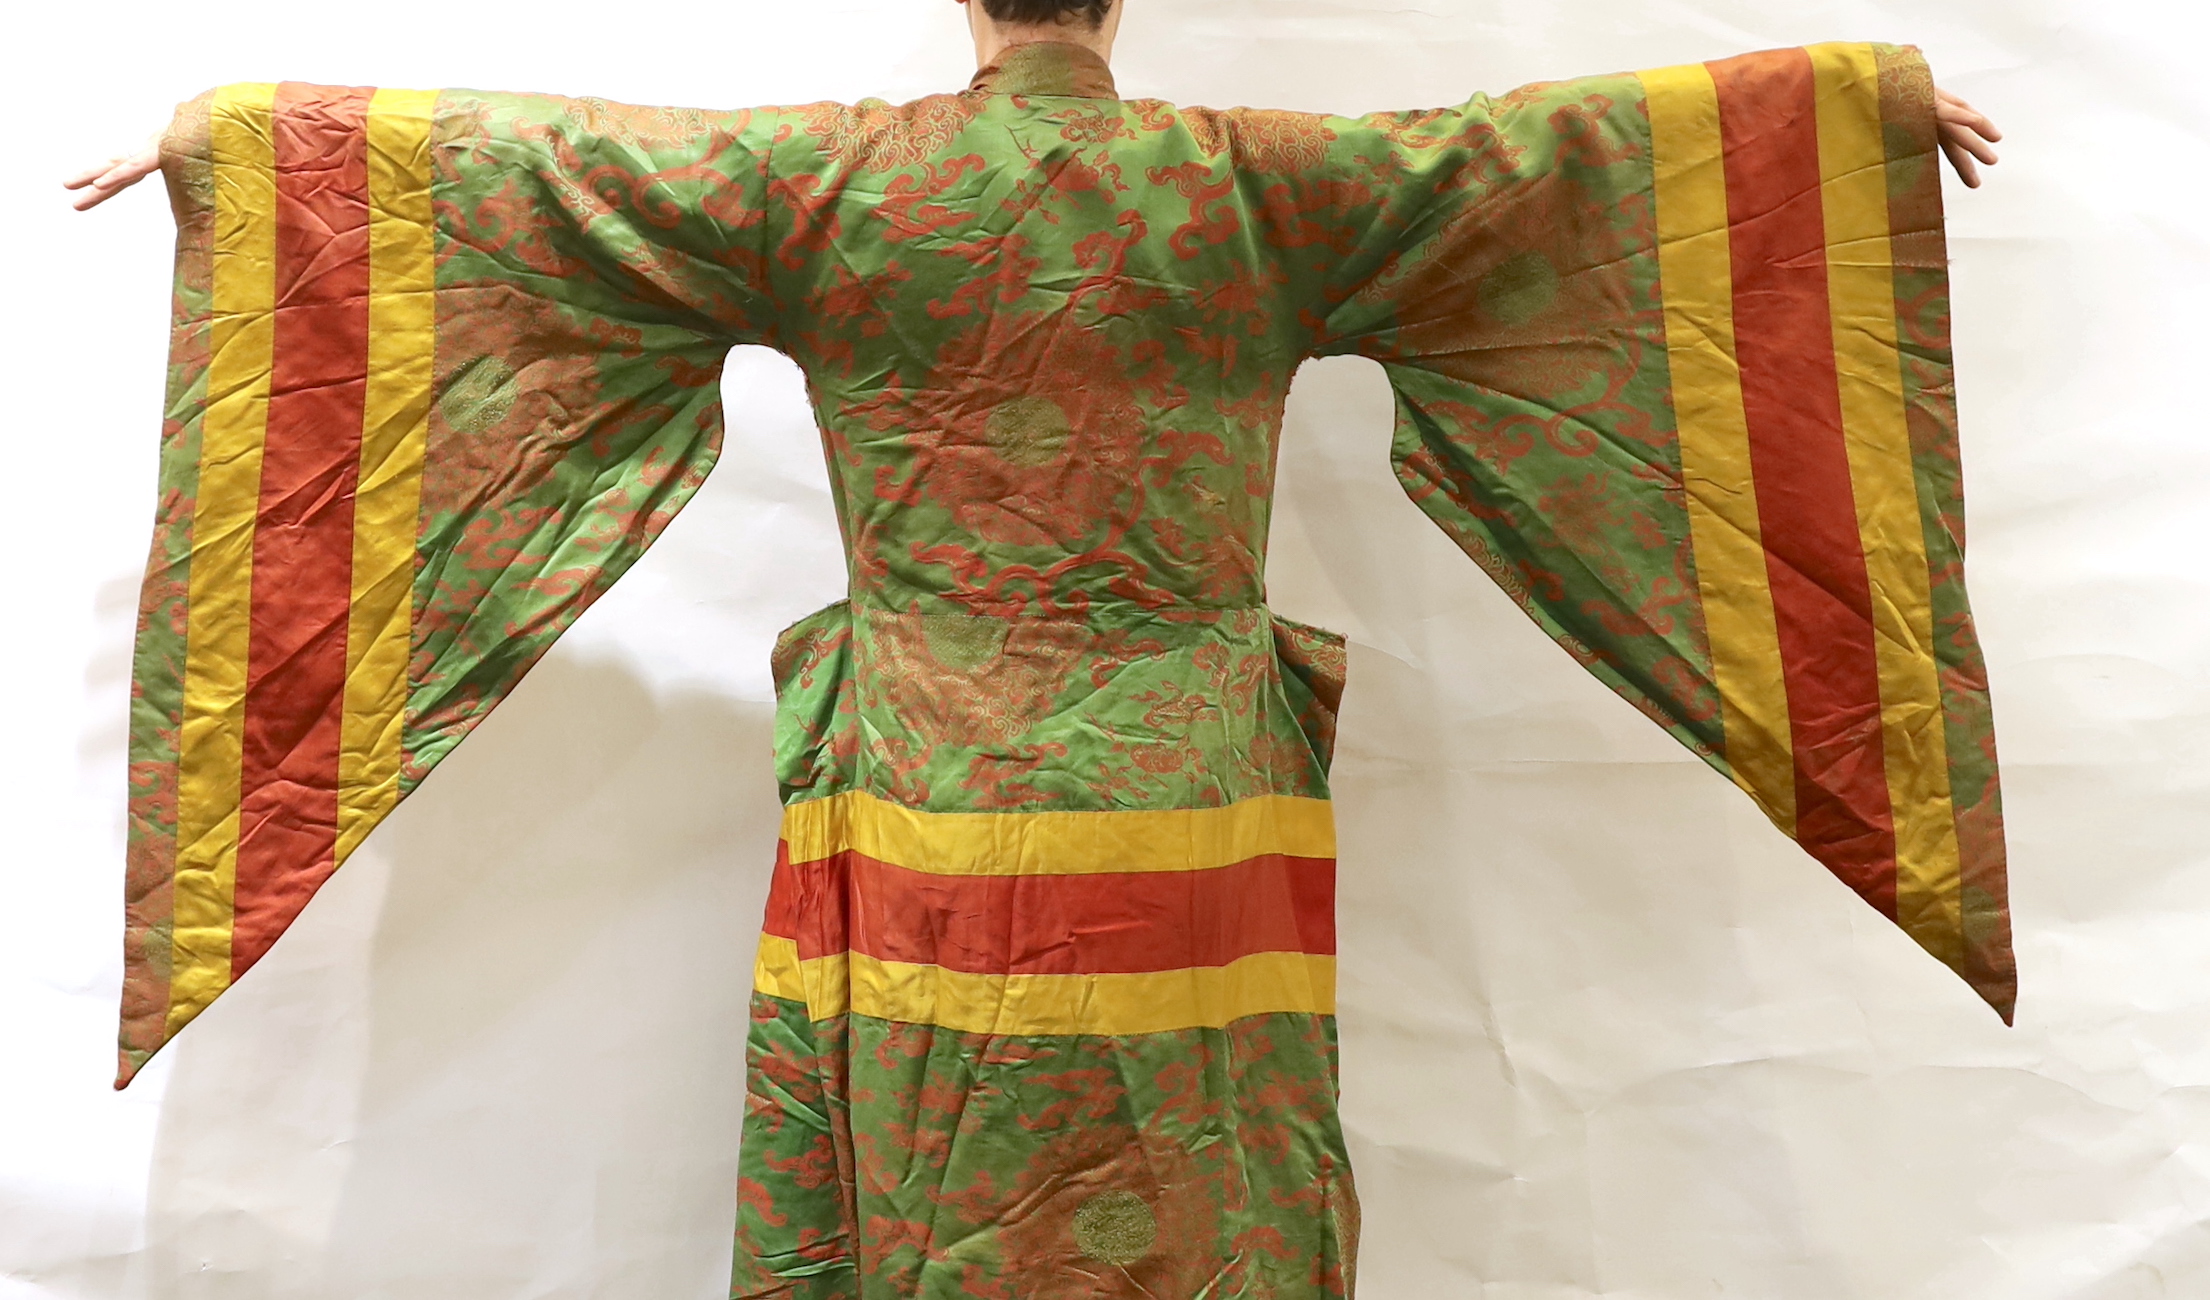 An unusual early 20th century Japanese silk damask kimono, designed with pointed sleeves and wide pleating on the hips, and horizontal yellow and red stripes, possibly a costume for a Kabuki theatre character